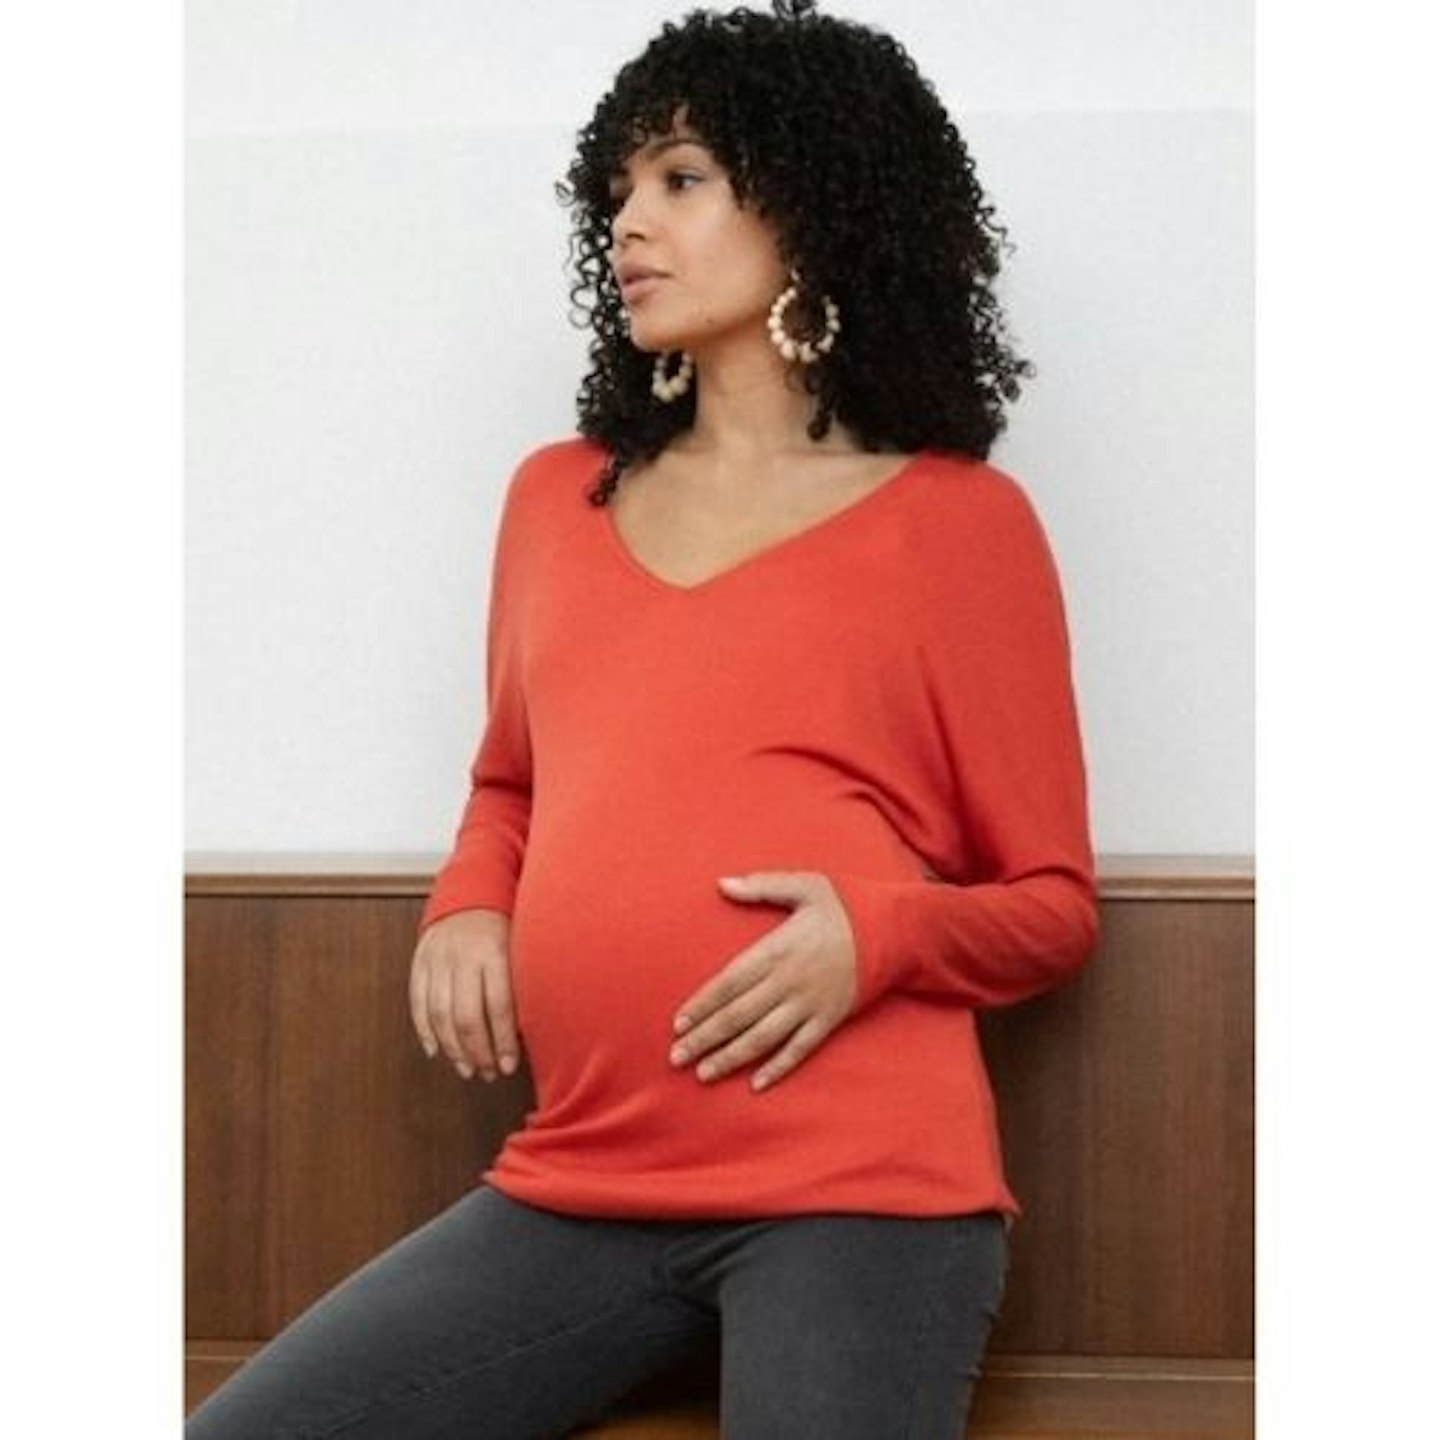 Angelica light maternity jumper in coral